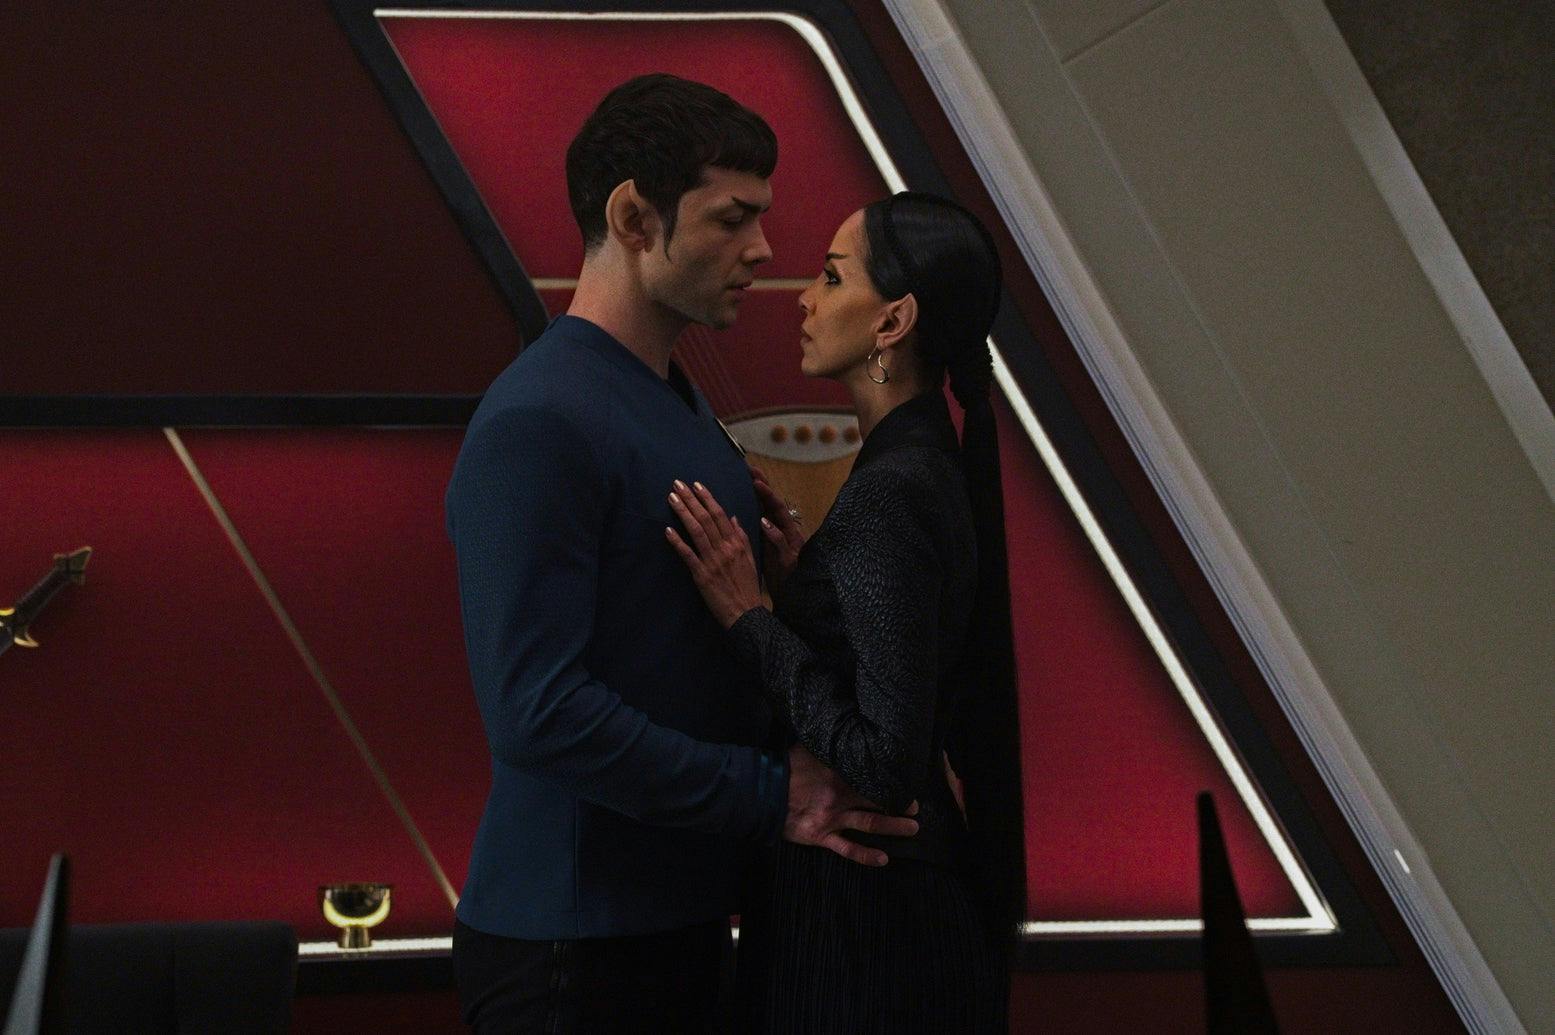 Spock and T'Pring (Strange New Worlds) stand close together, with T'Pring's hands on Spock's chest.